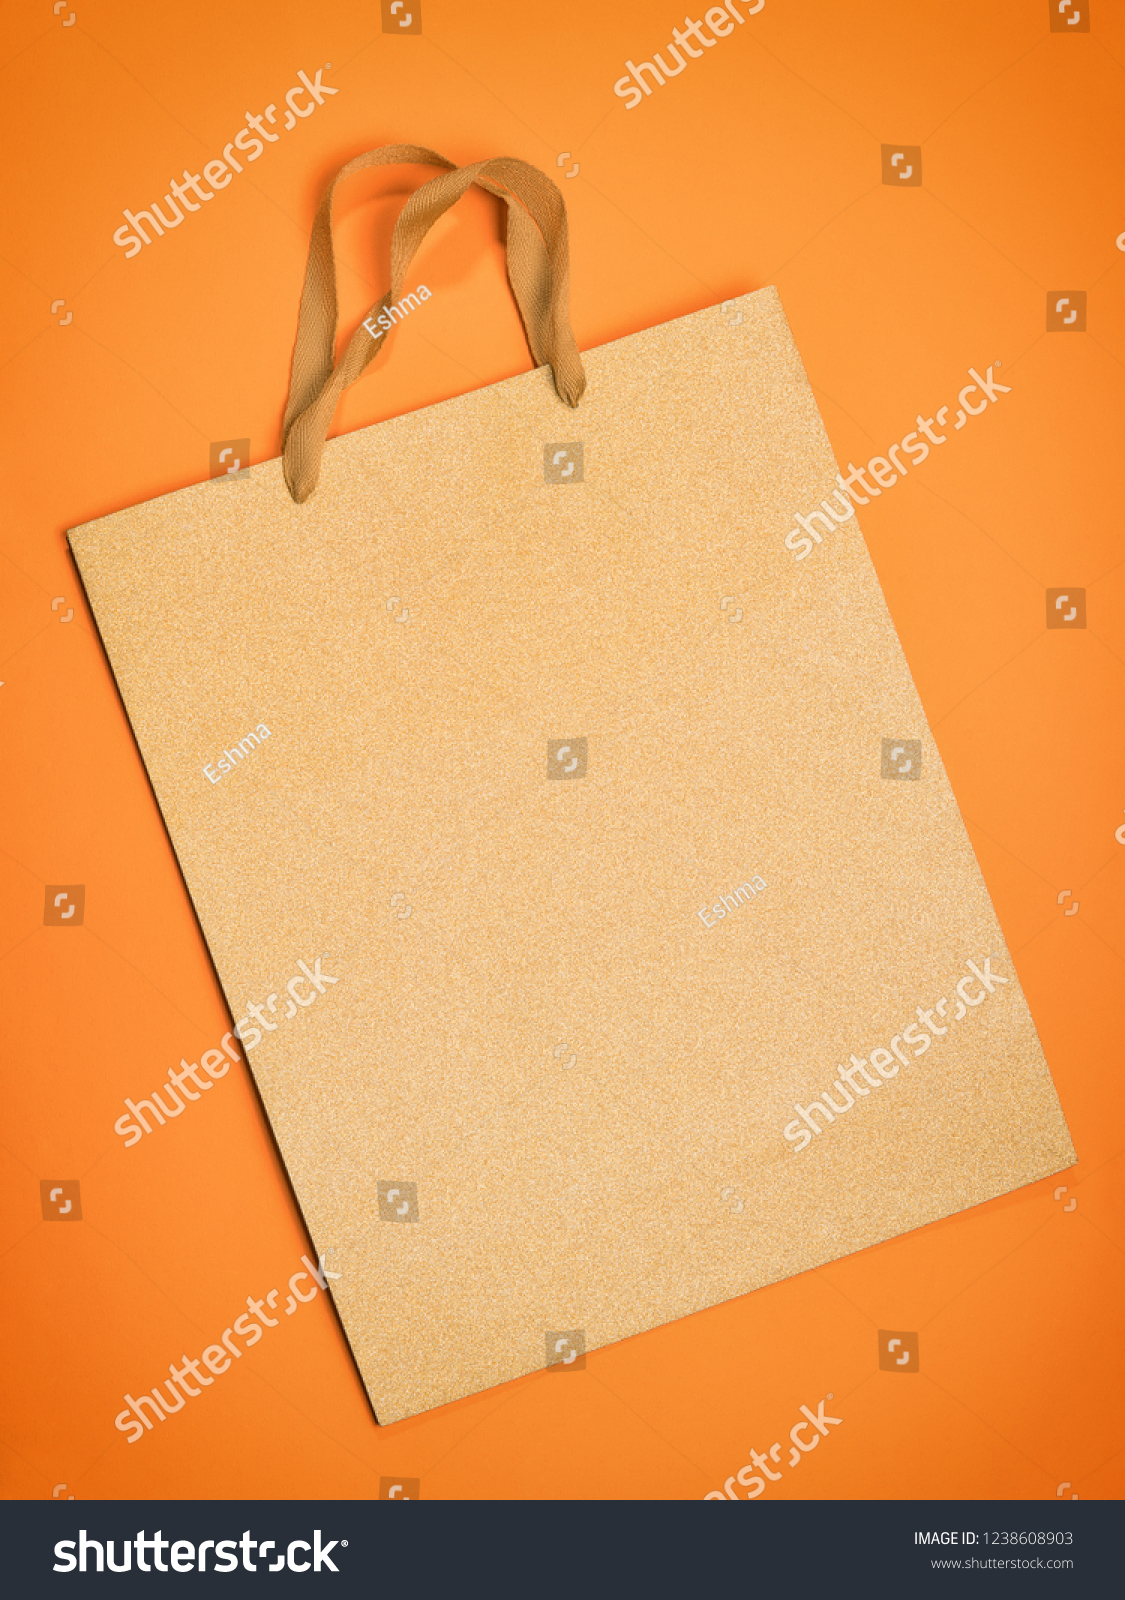 Gift bag on orange. Flat composition with copy space #1238608903